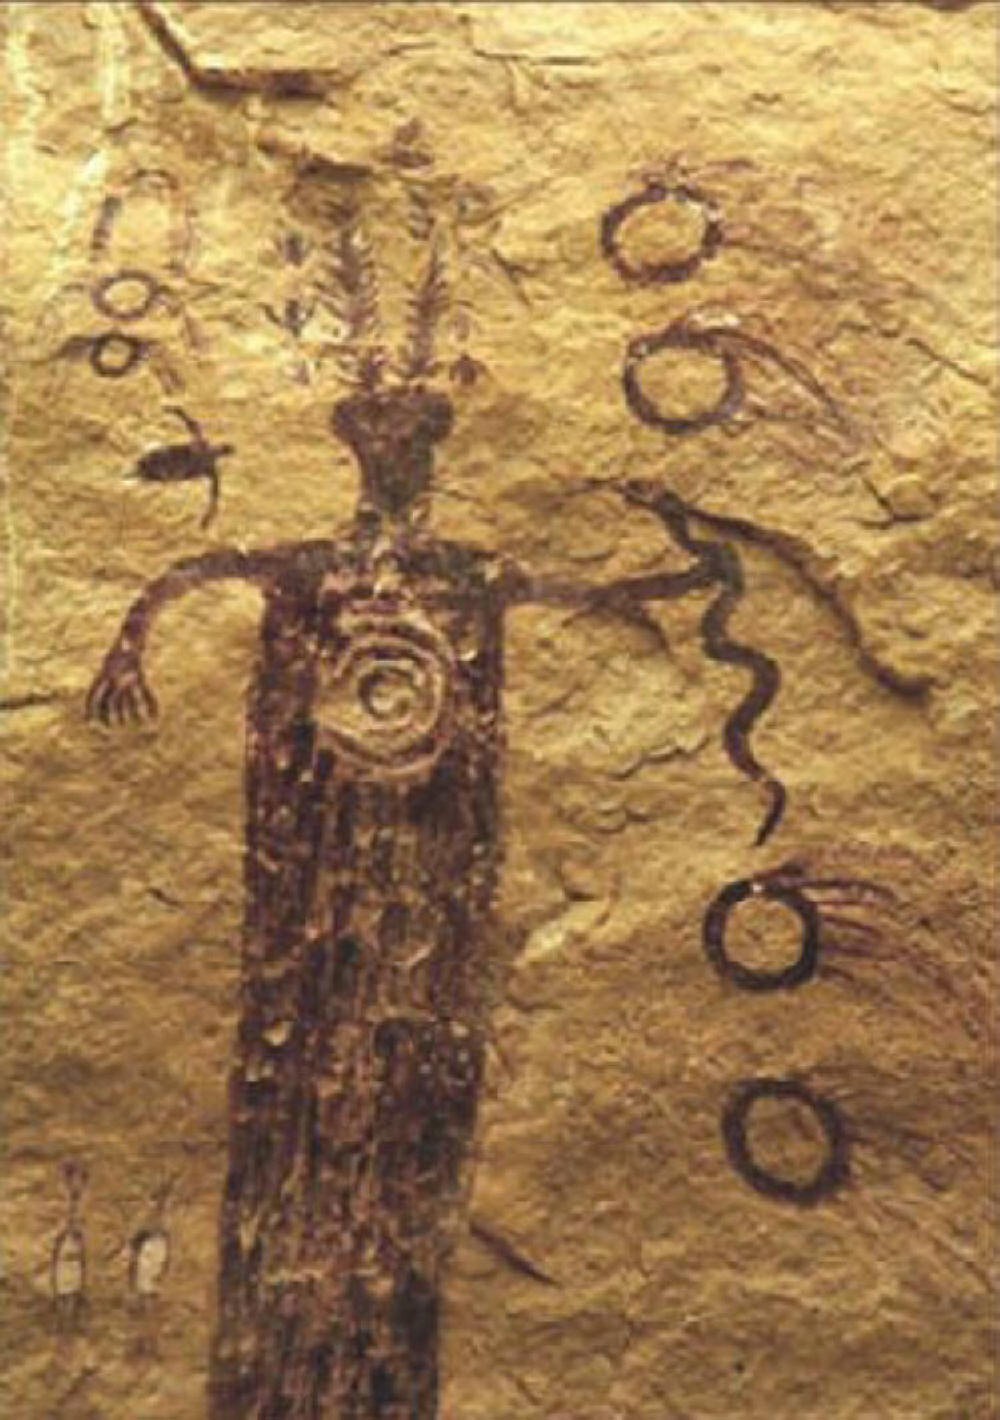 Ancient Petroglyphs, Pictographs, and Cave Drawings From Around the World